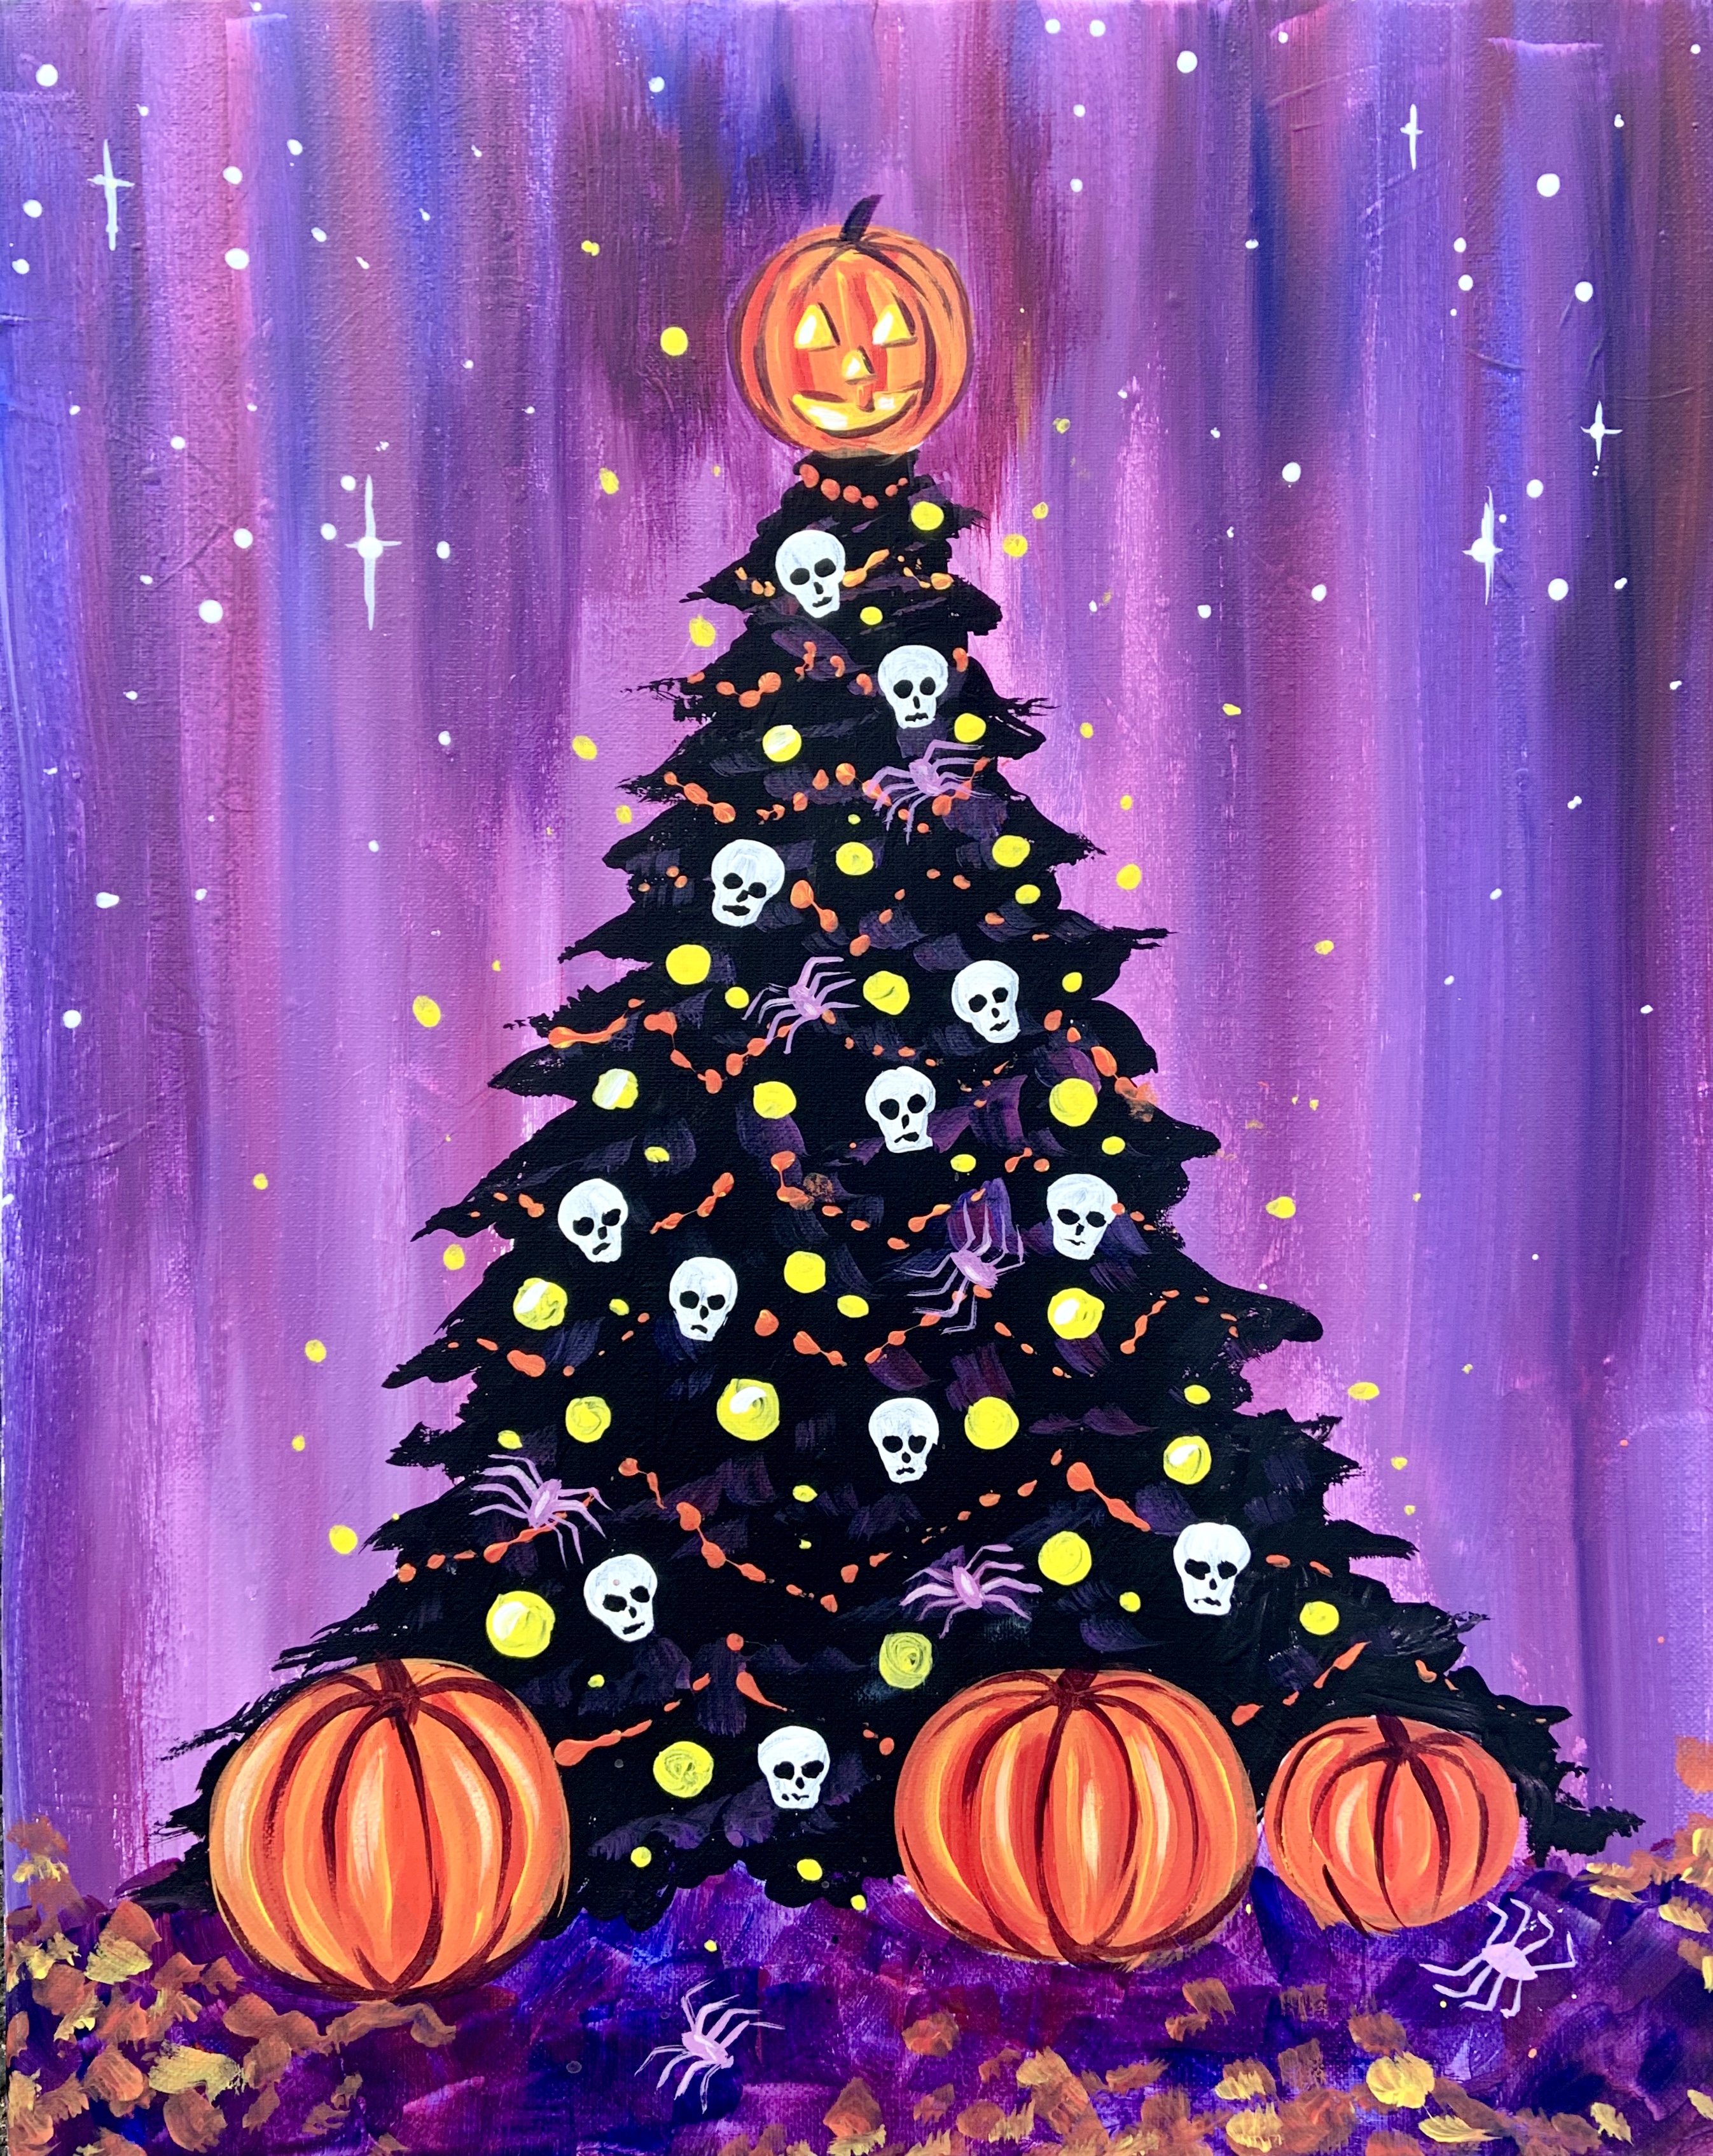 A Halloween Dream Tree experience project by Yaymaker